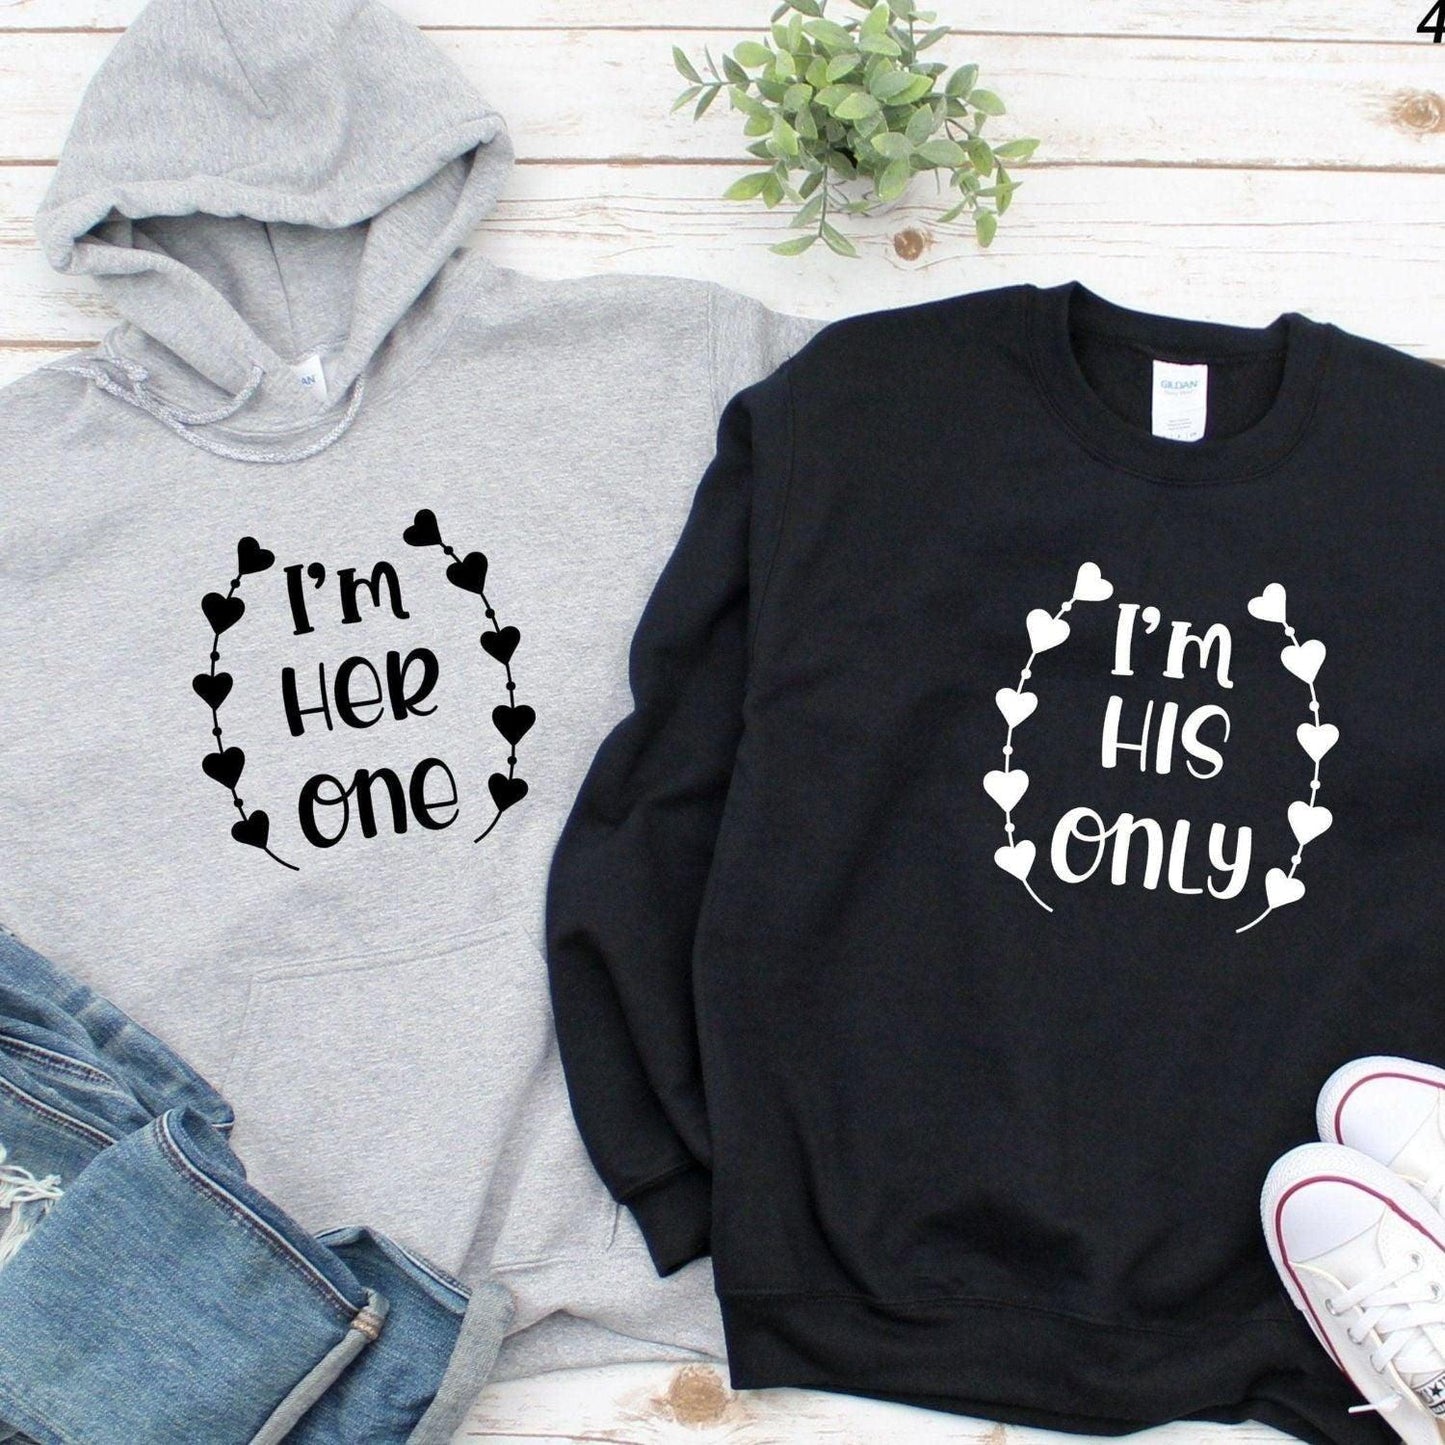 Valentine Gift: Matching Set for Couples - I'm Her One & I'm His Only - 4Lovebirds